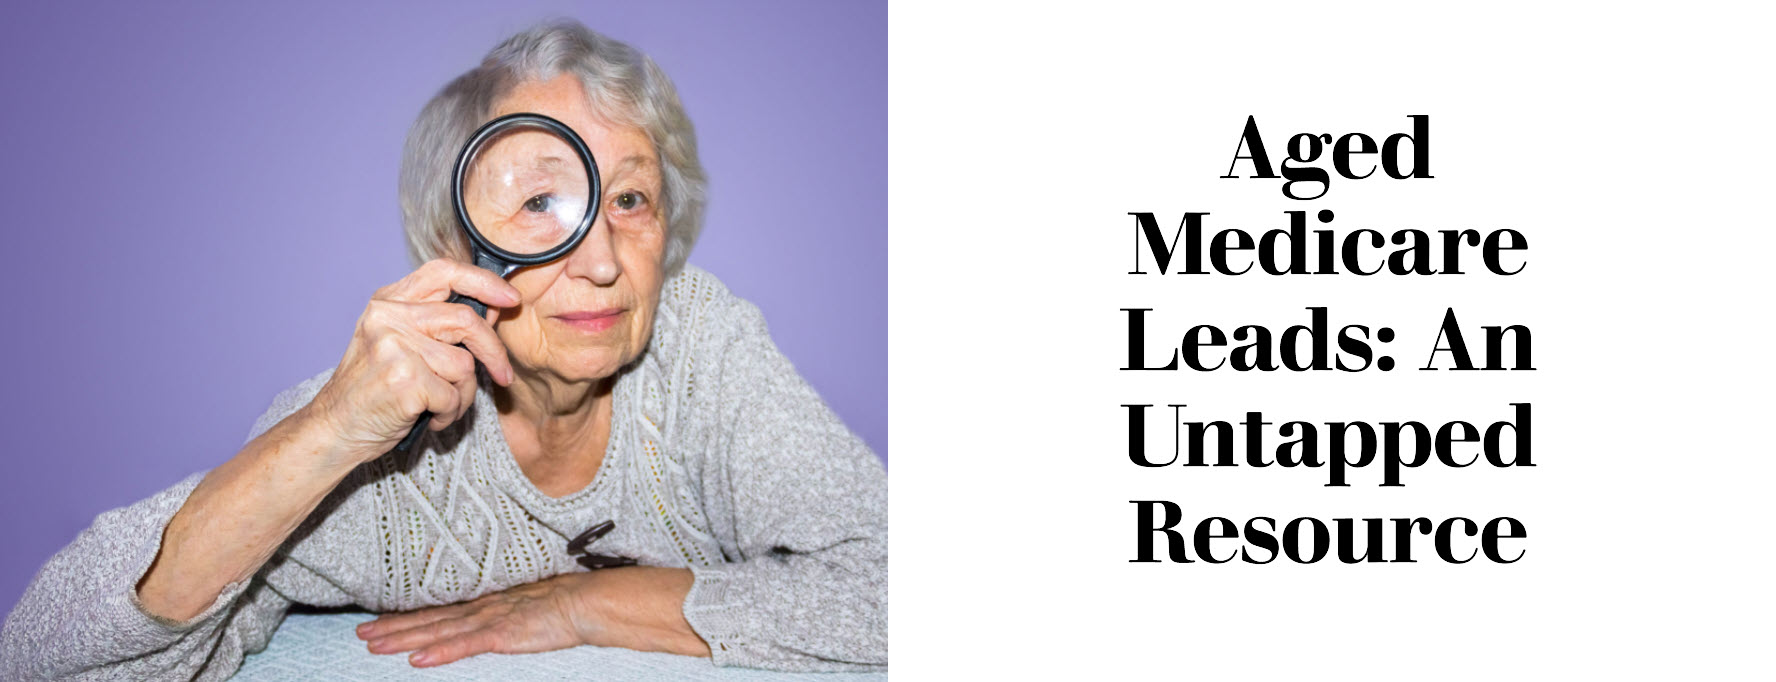 Aged Medicare Leads: An Untapped Resource